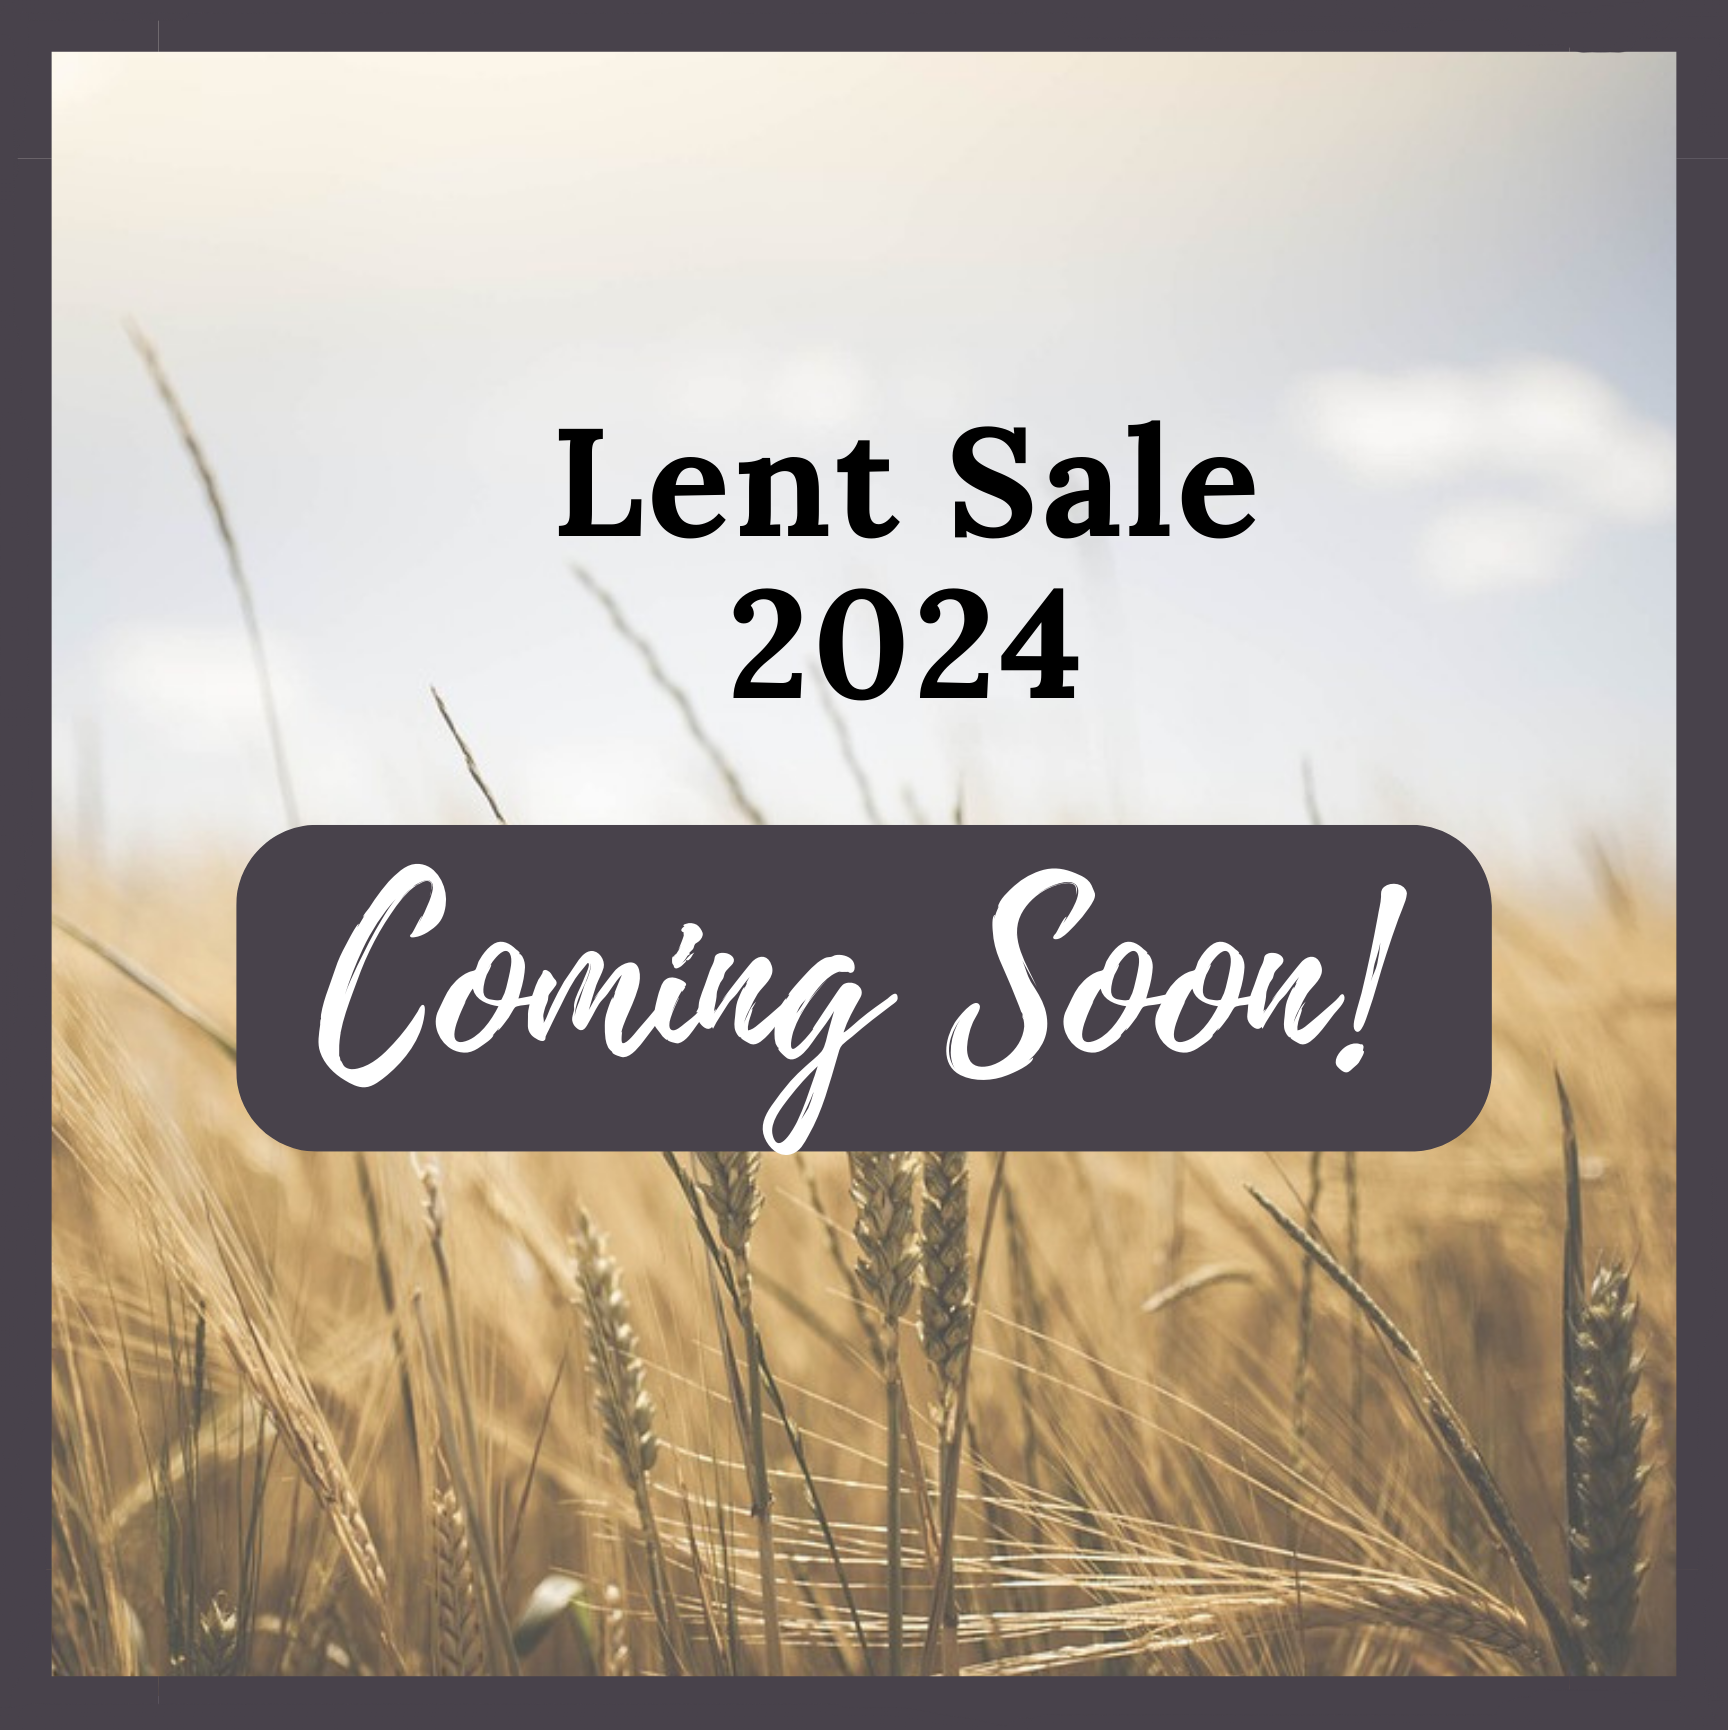 Lent Sale 2024 Coming Soon!